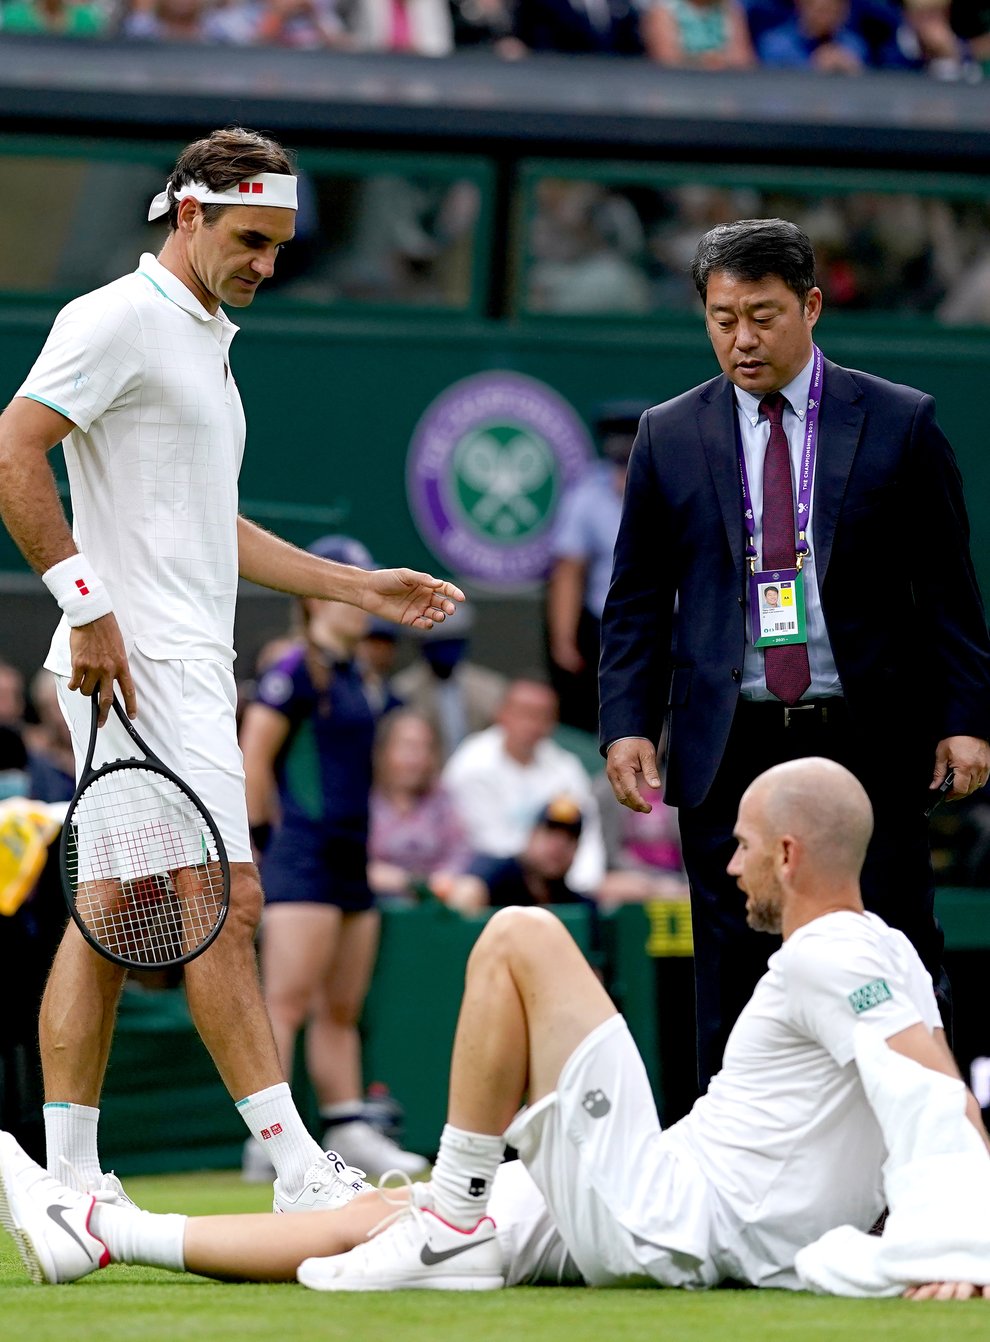 Roger Federer checks on Adrian Mannarino after his fall on Centre Court